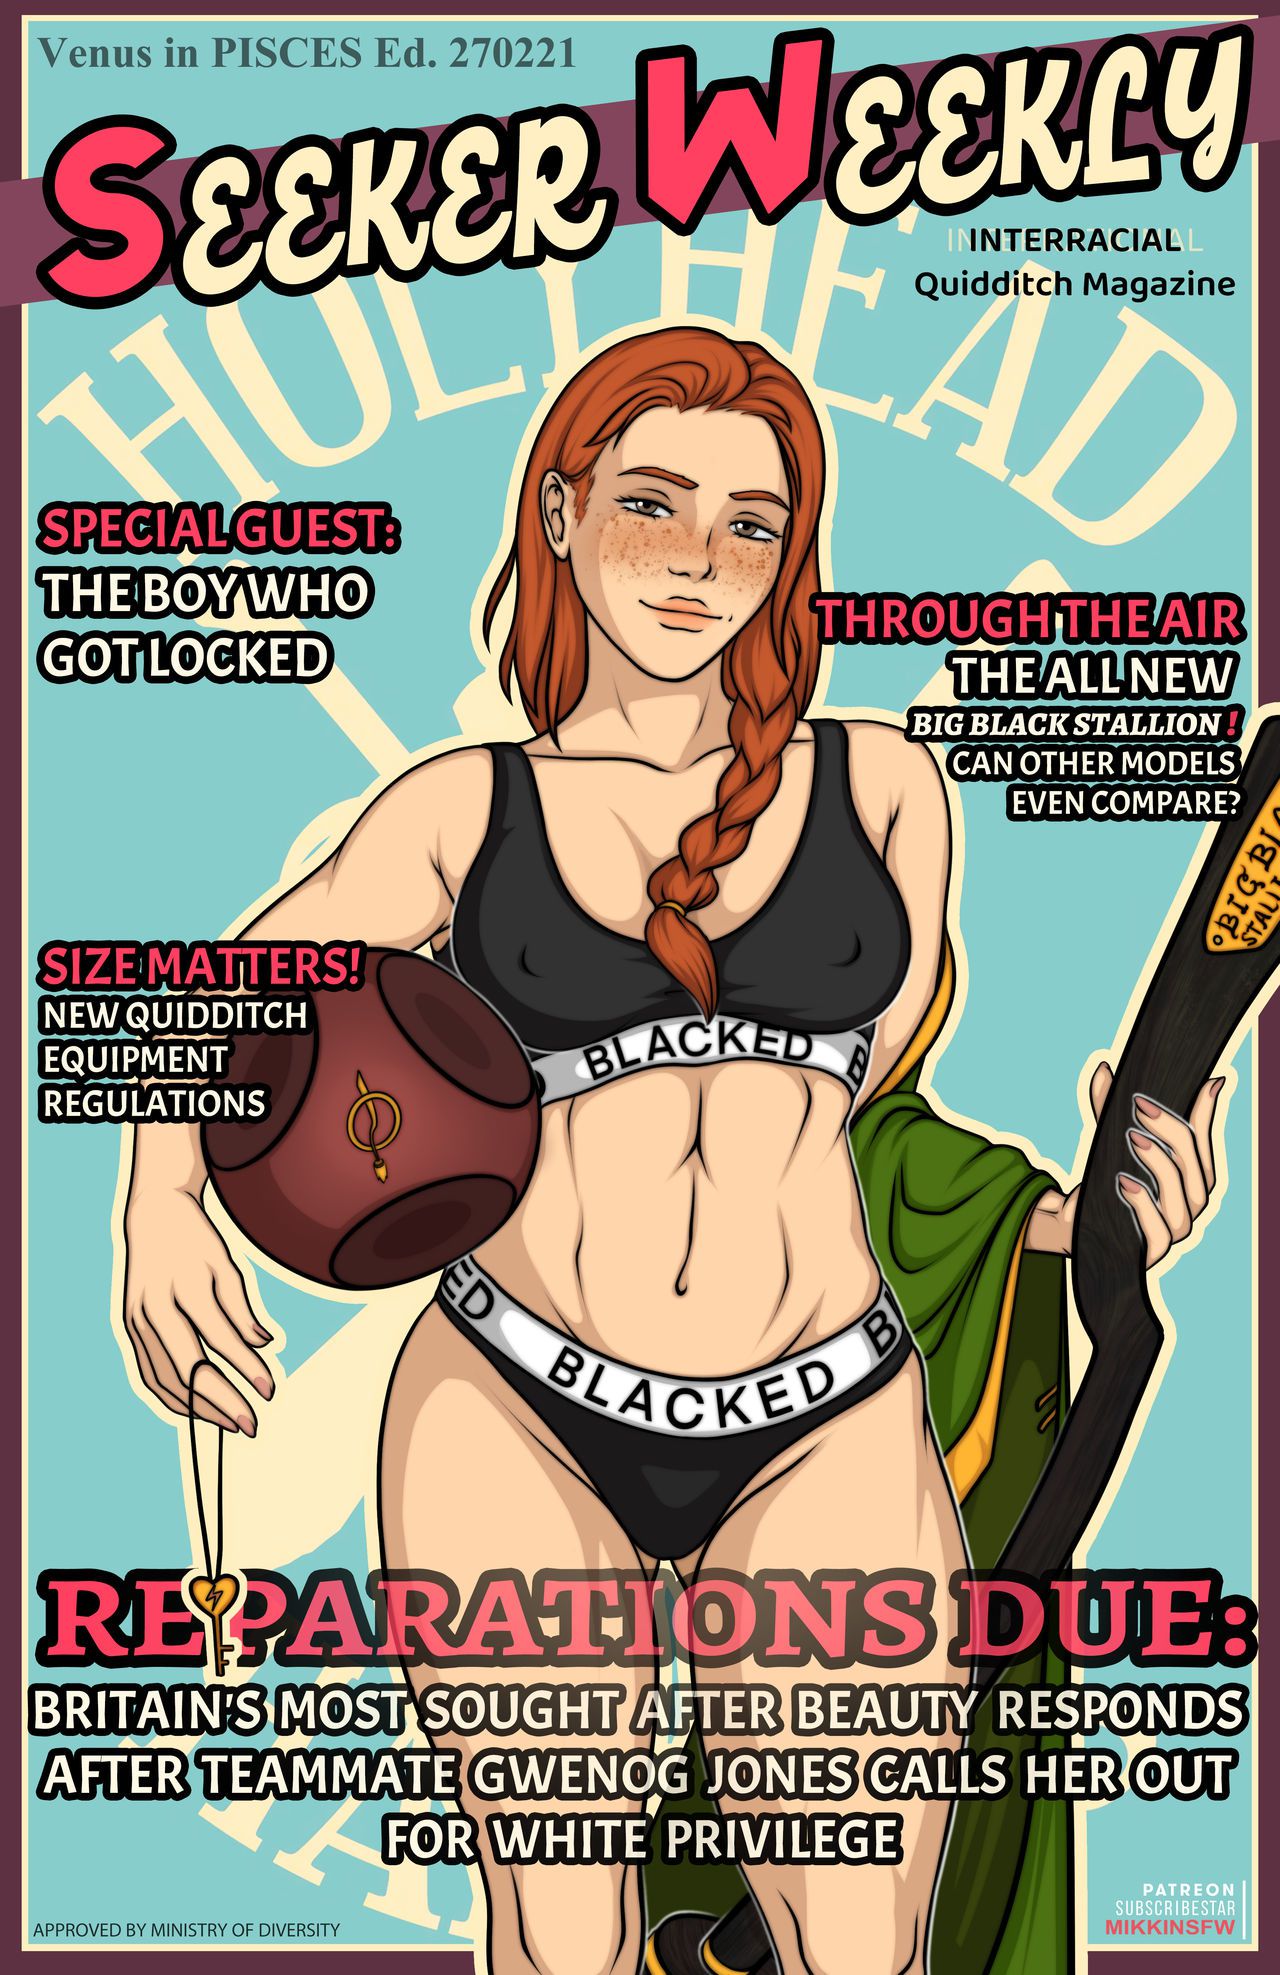 [MIKKINSFW] Archives - Harry Potter girls BLACKED 2